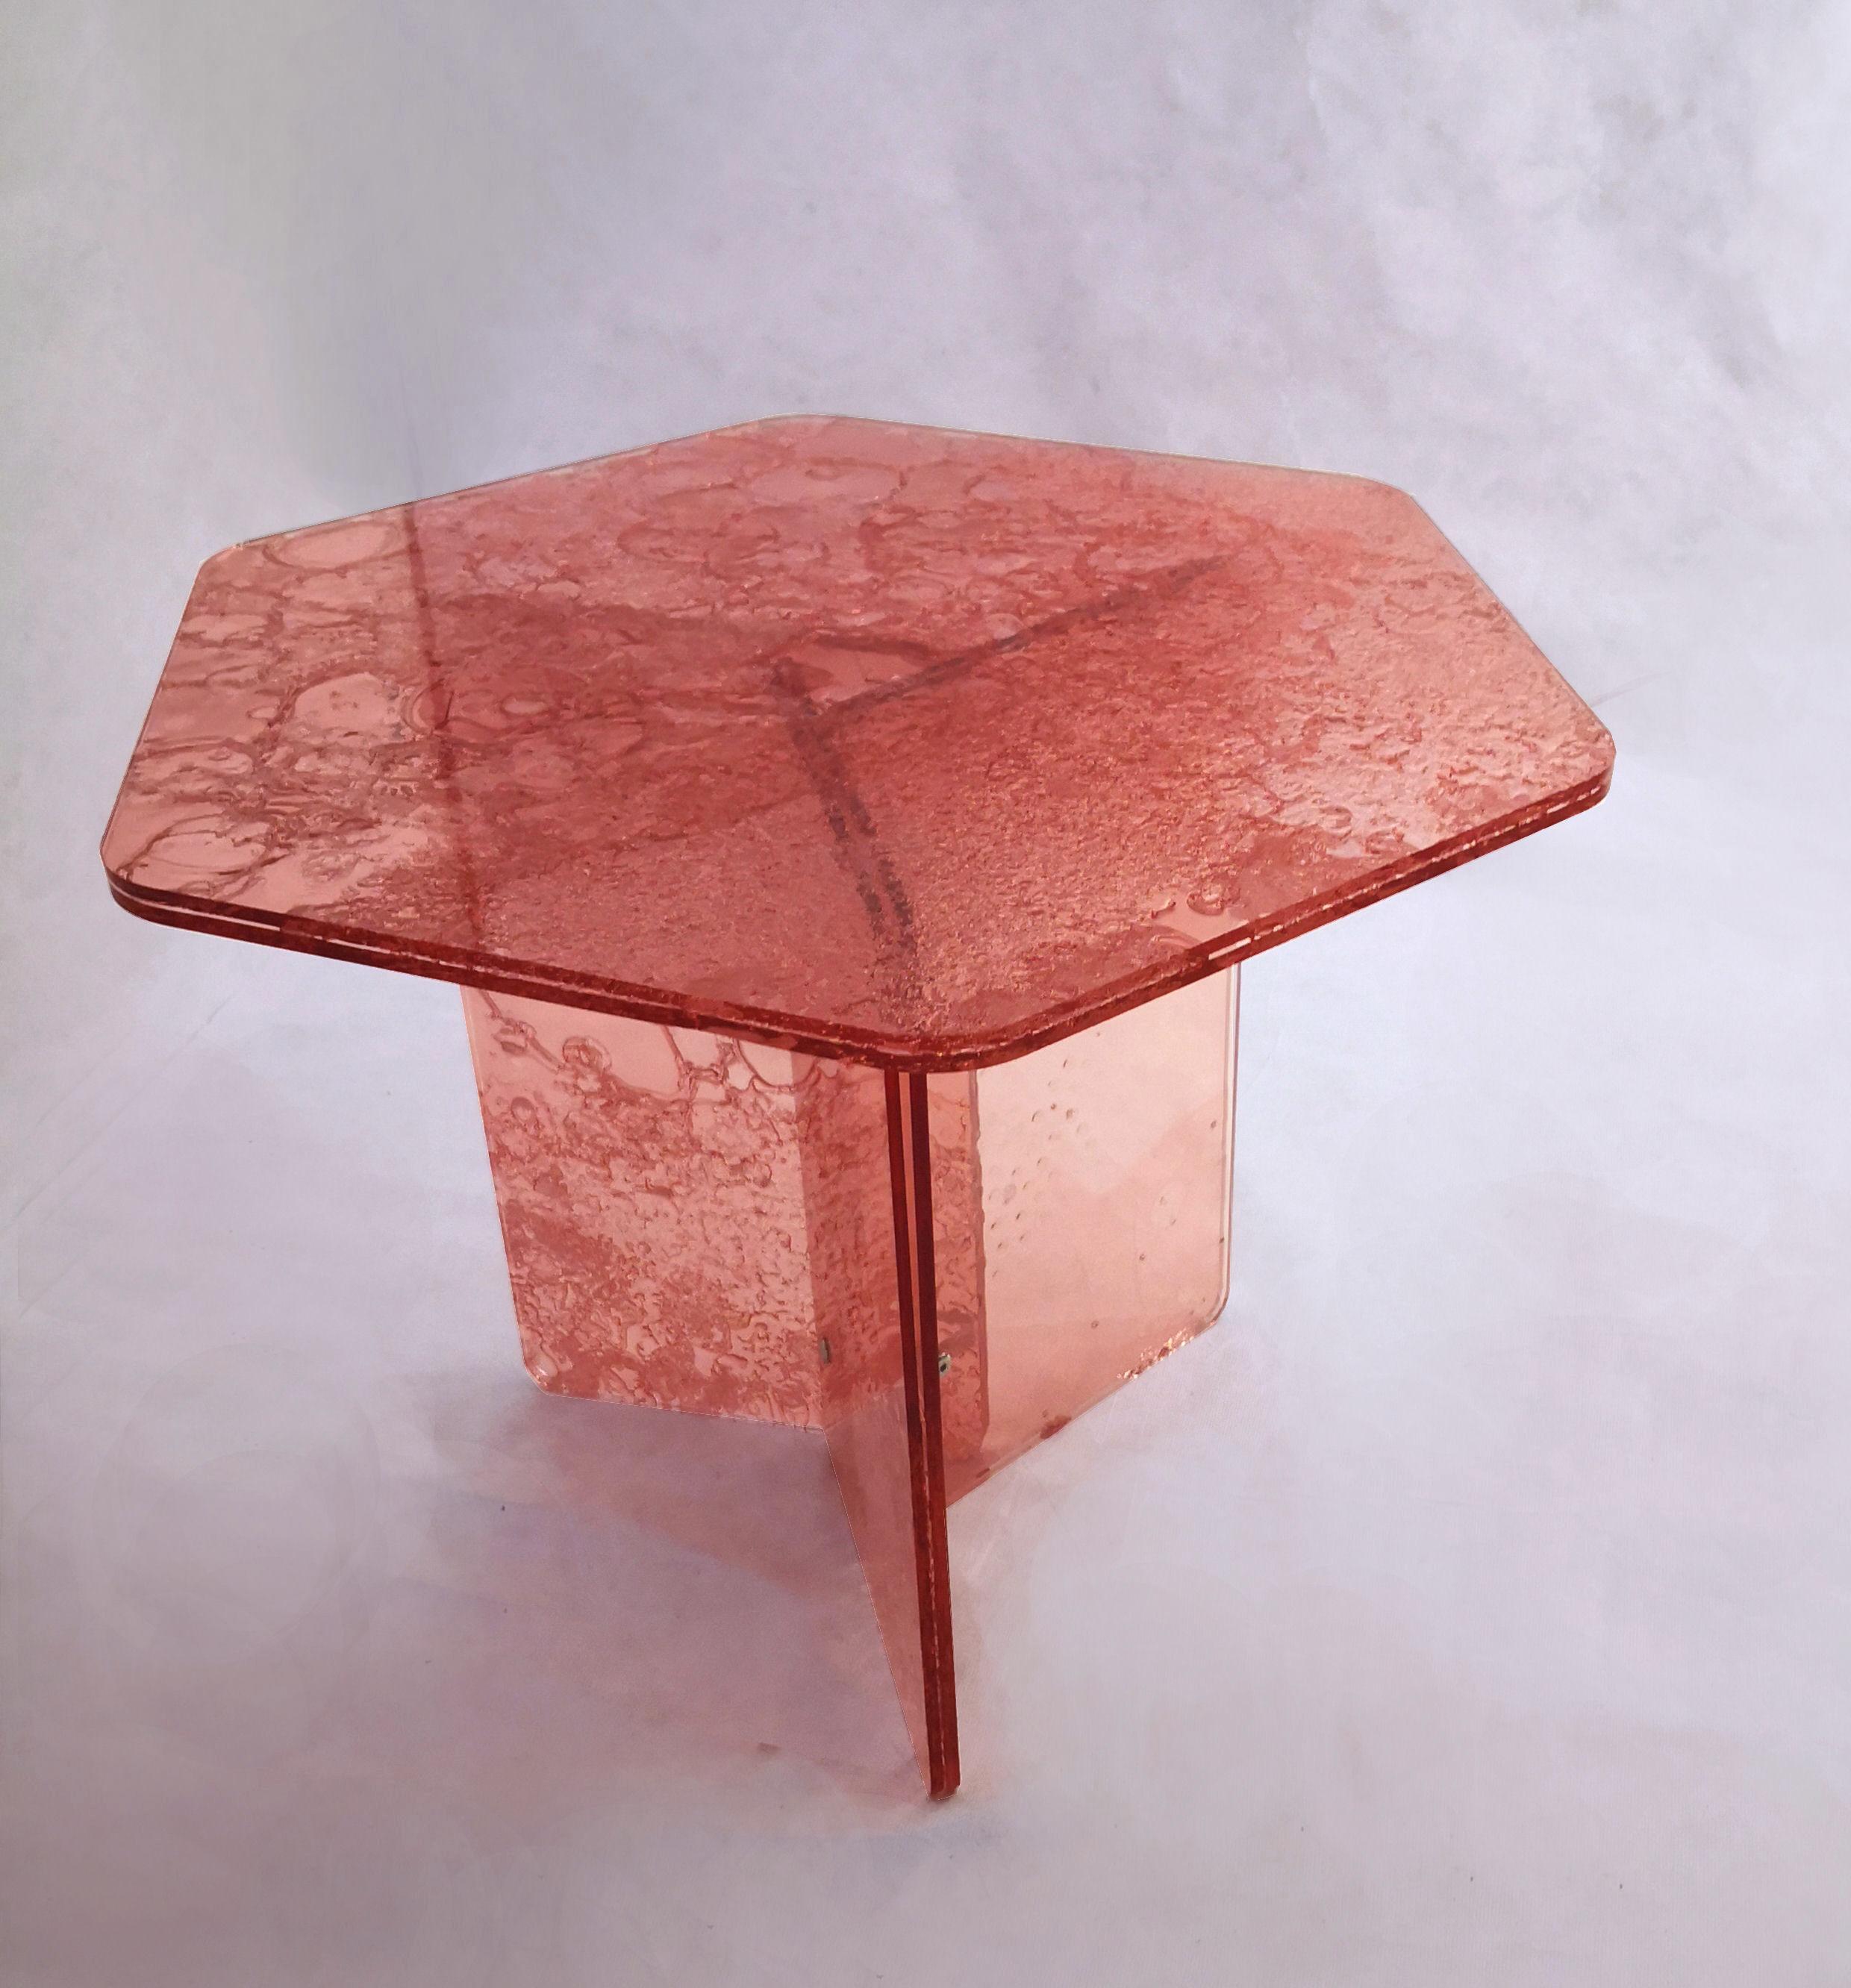 Modern Sketch Hexagon Sidetable Made of Pink Acrylic Des, Roberto Giacomucci in 2020 For Sale